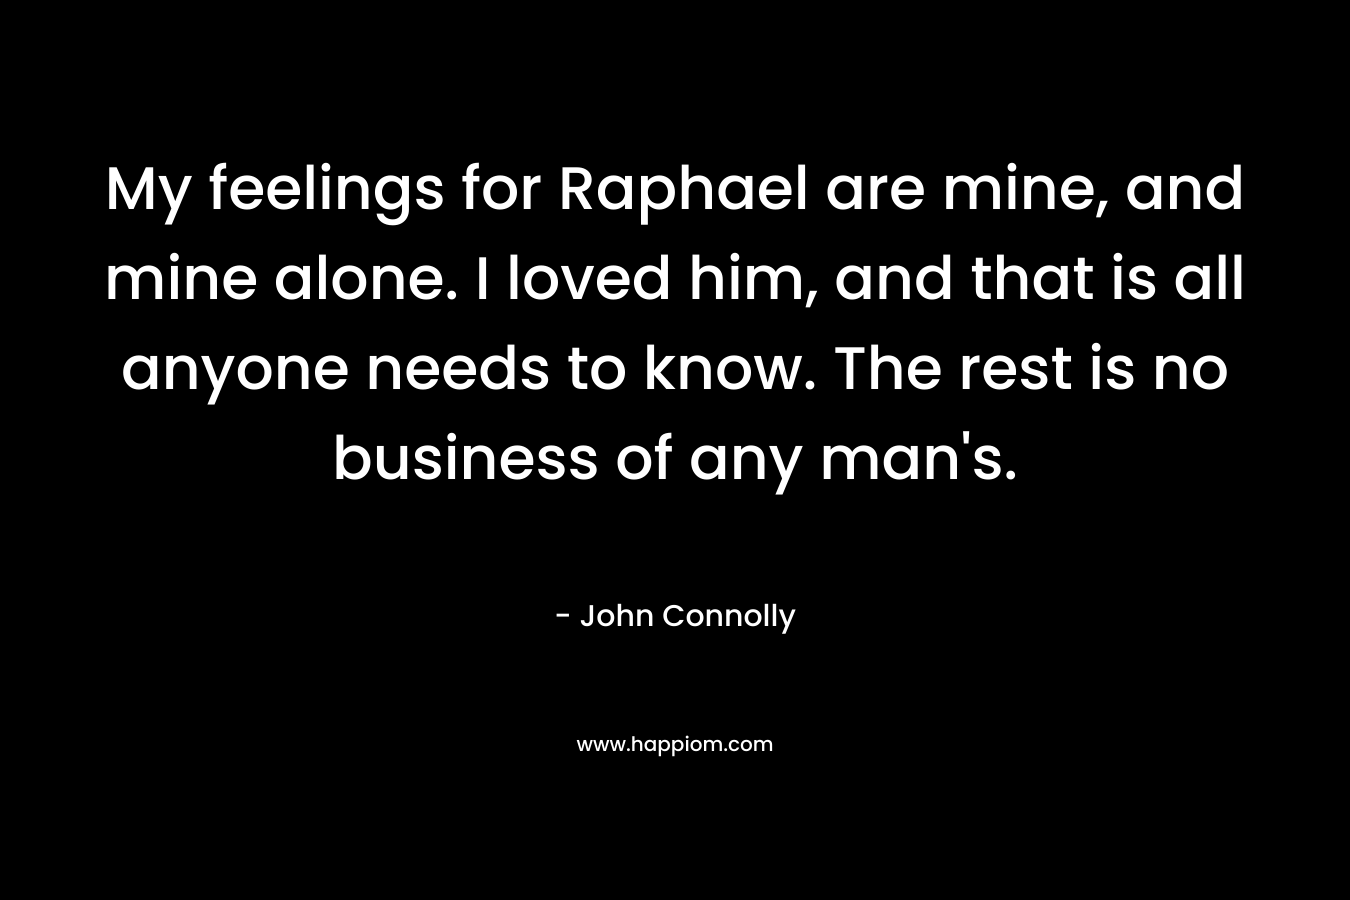 My feelings for Raphael are mine, and mine alone. I loved him, and that is all anyone needs to know. The rest is no business of any man's.